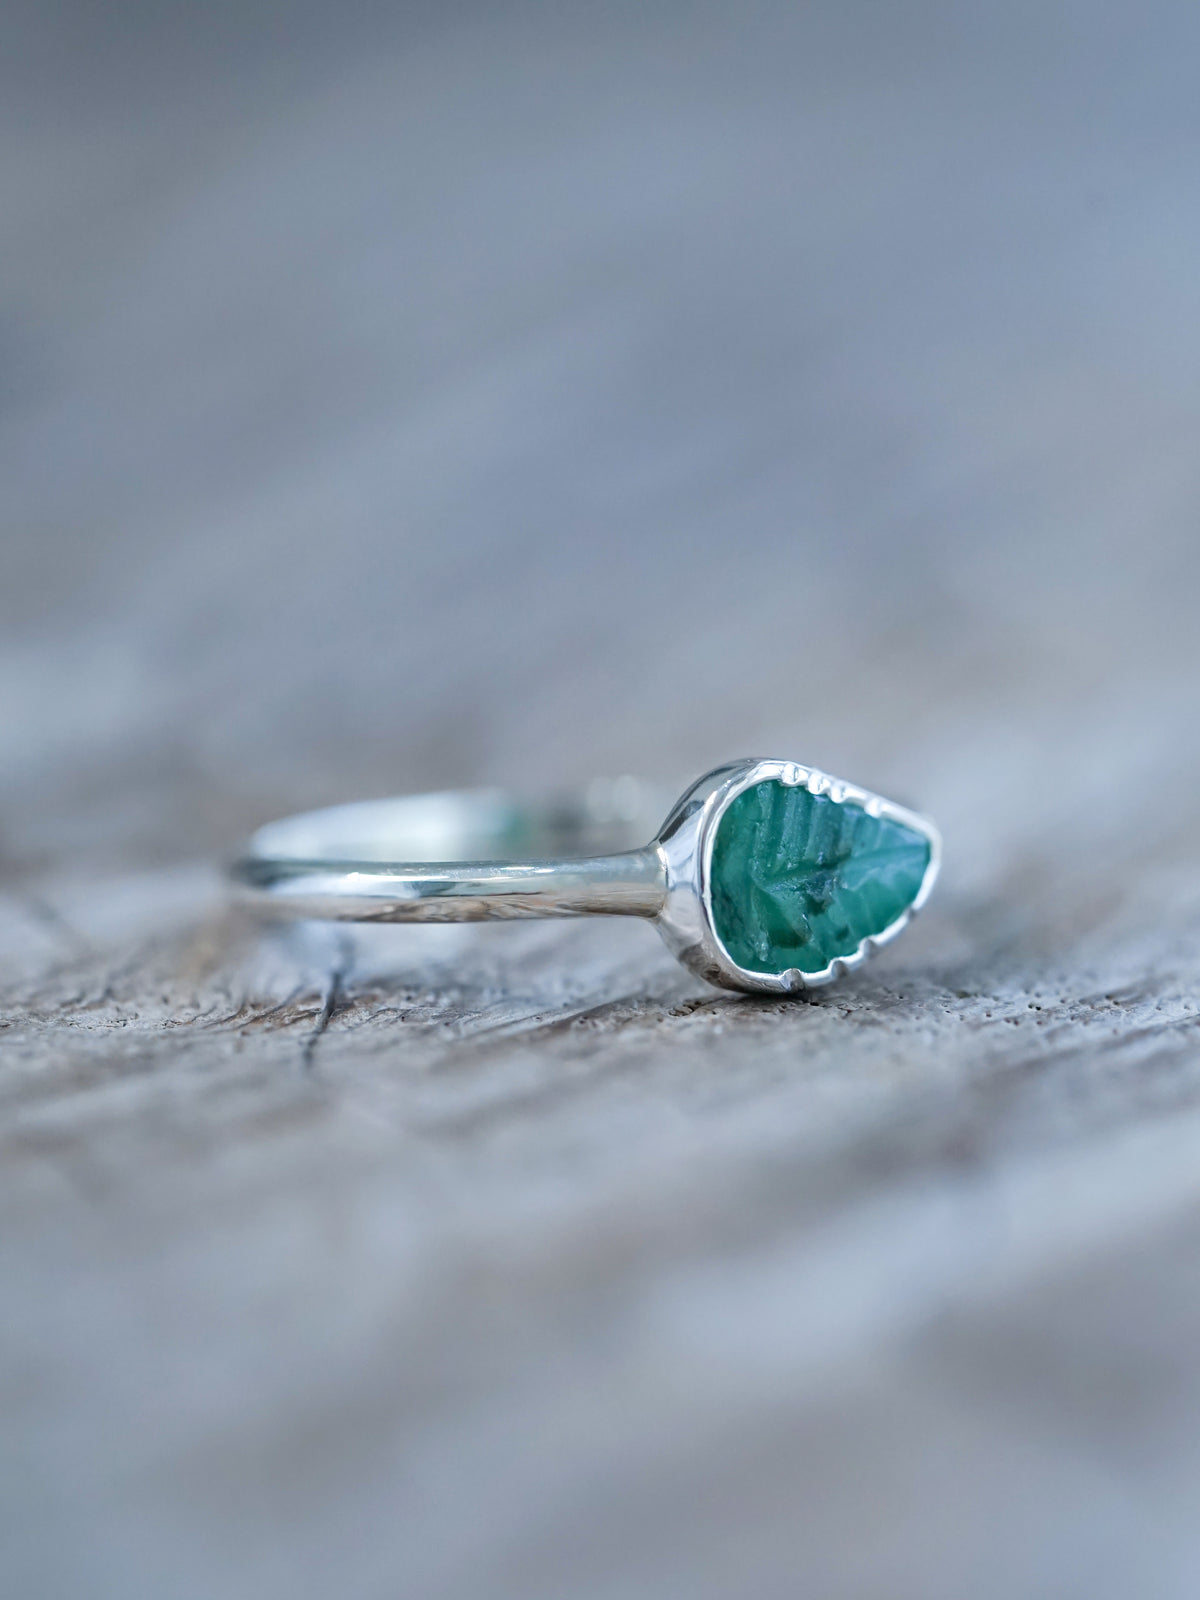 Amazon.com: Hydro Emerald Silver Ring, 925K Sterling Silver, Faceted Oval,  Artisan Handcrafted Jewelry, Oxidized Silver, Men's Emerald Ring, Men's  Filigree Ring, Unique Gift, Size 4-13 : Handmade Products